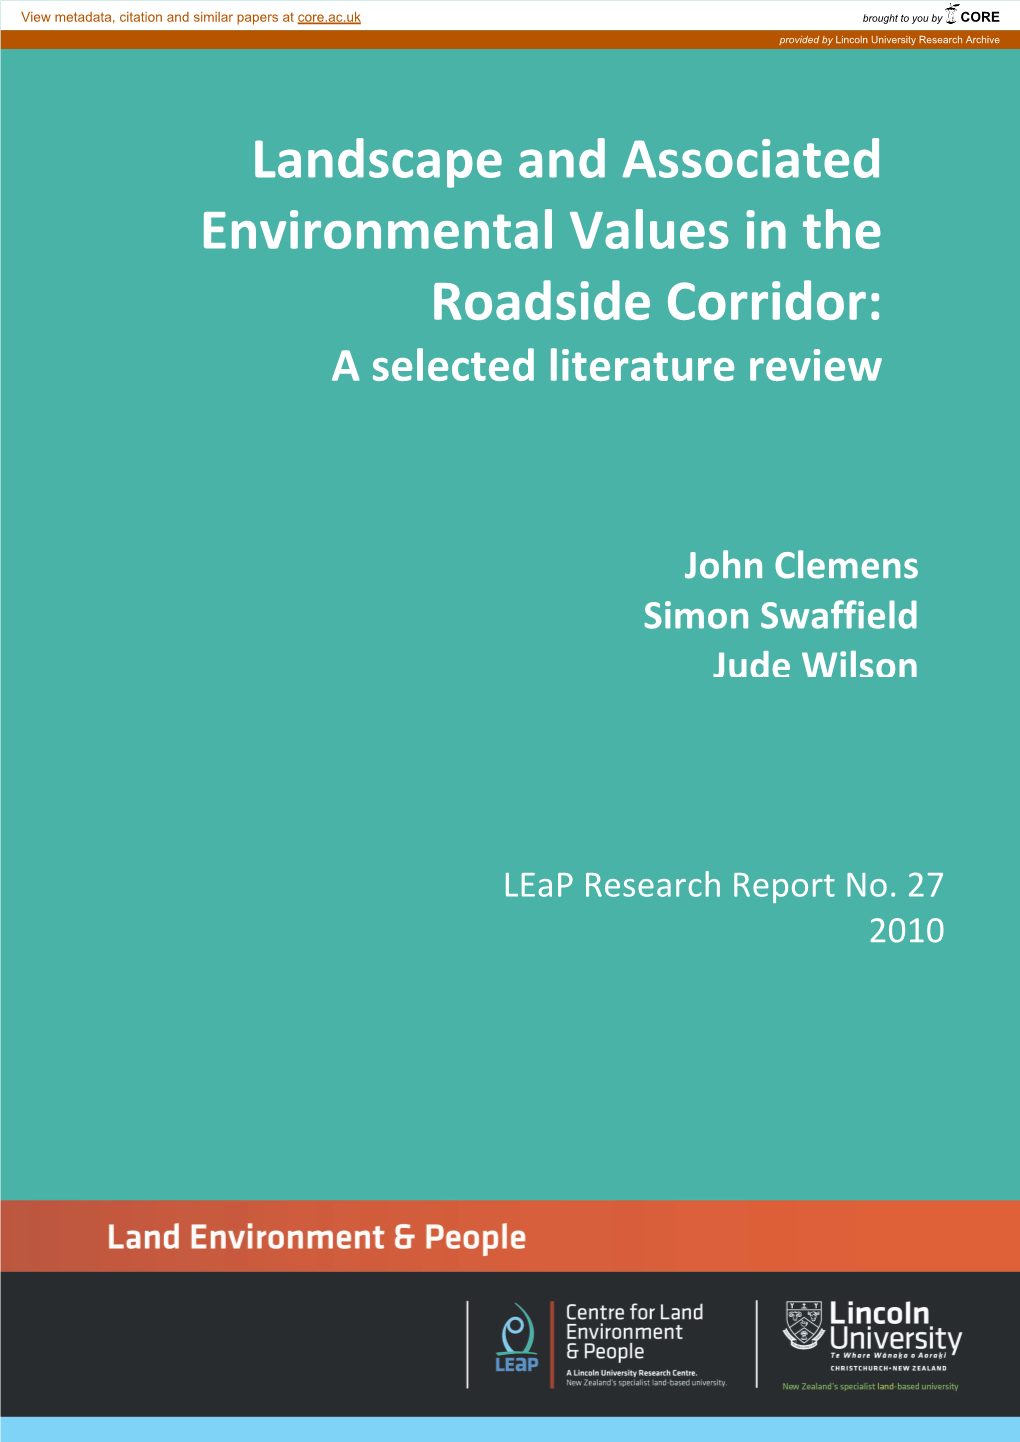 Landscape and Associated Environmental Values in the Roadside Corridor: a Selected Literature Review